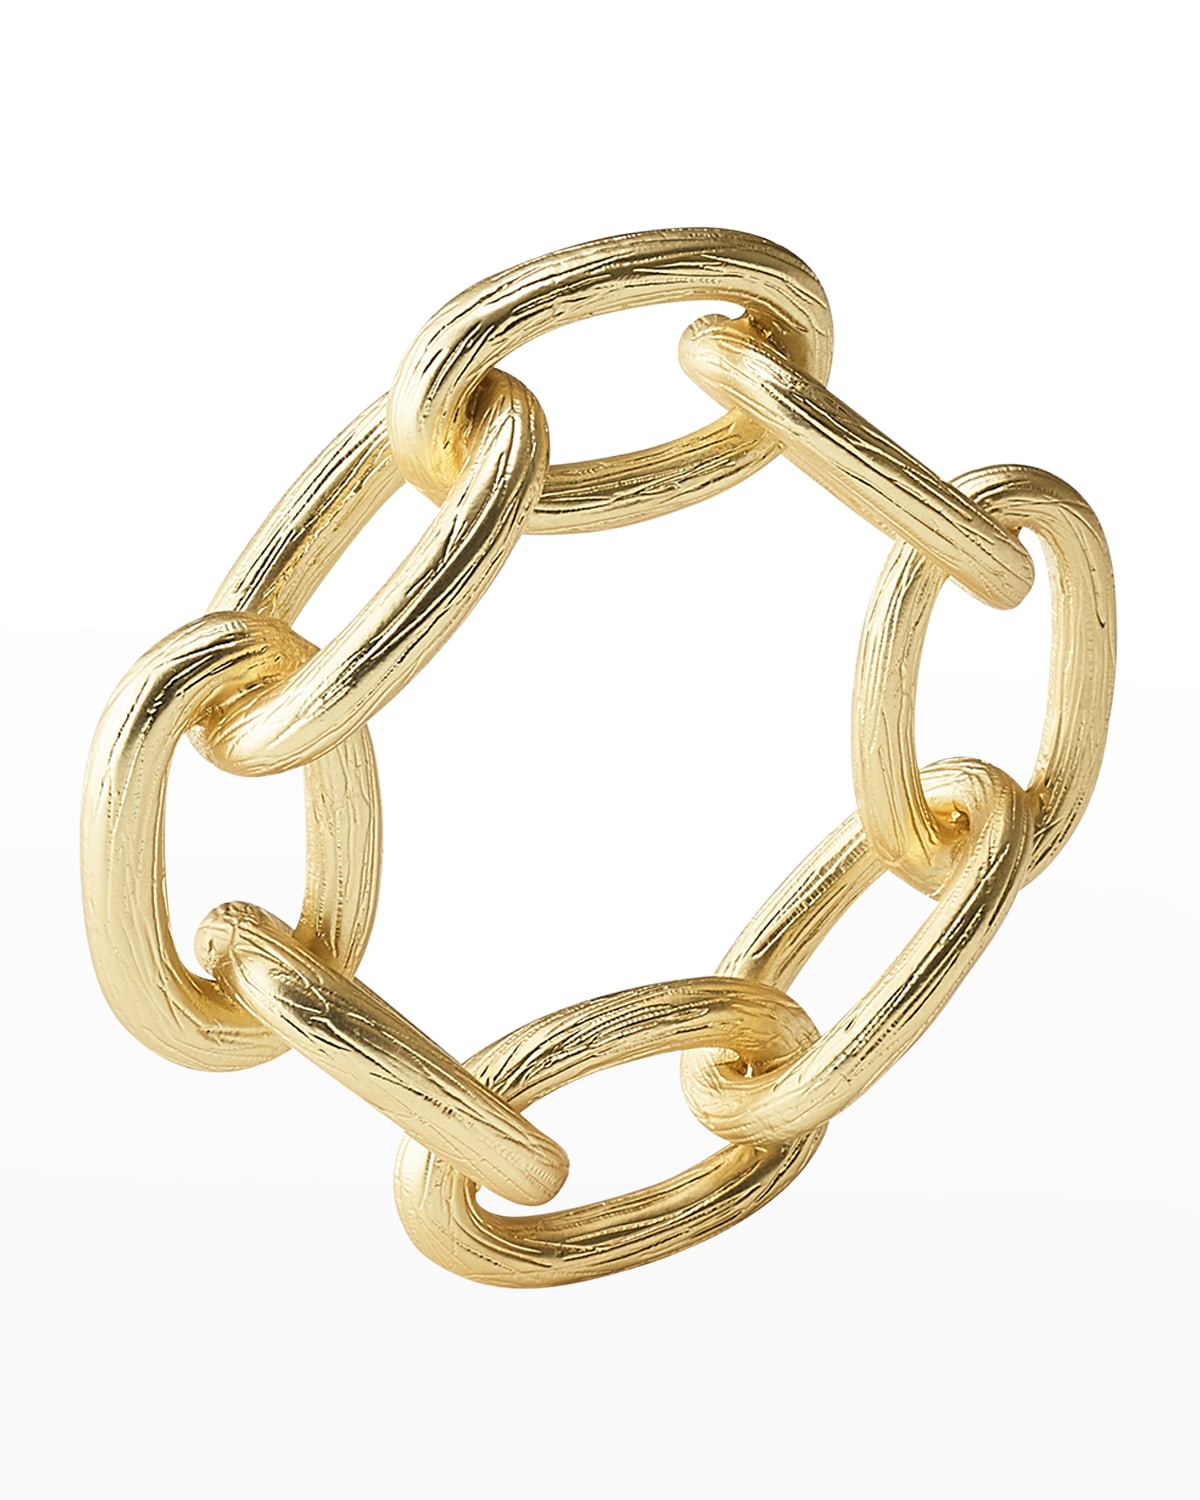 Chain Link Napkin Ring